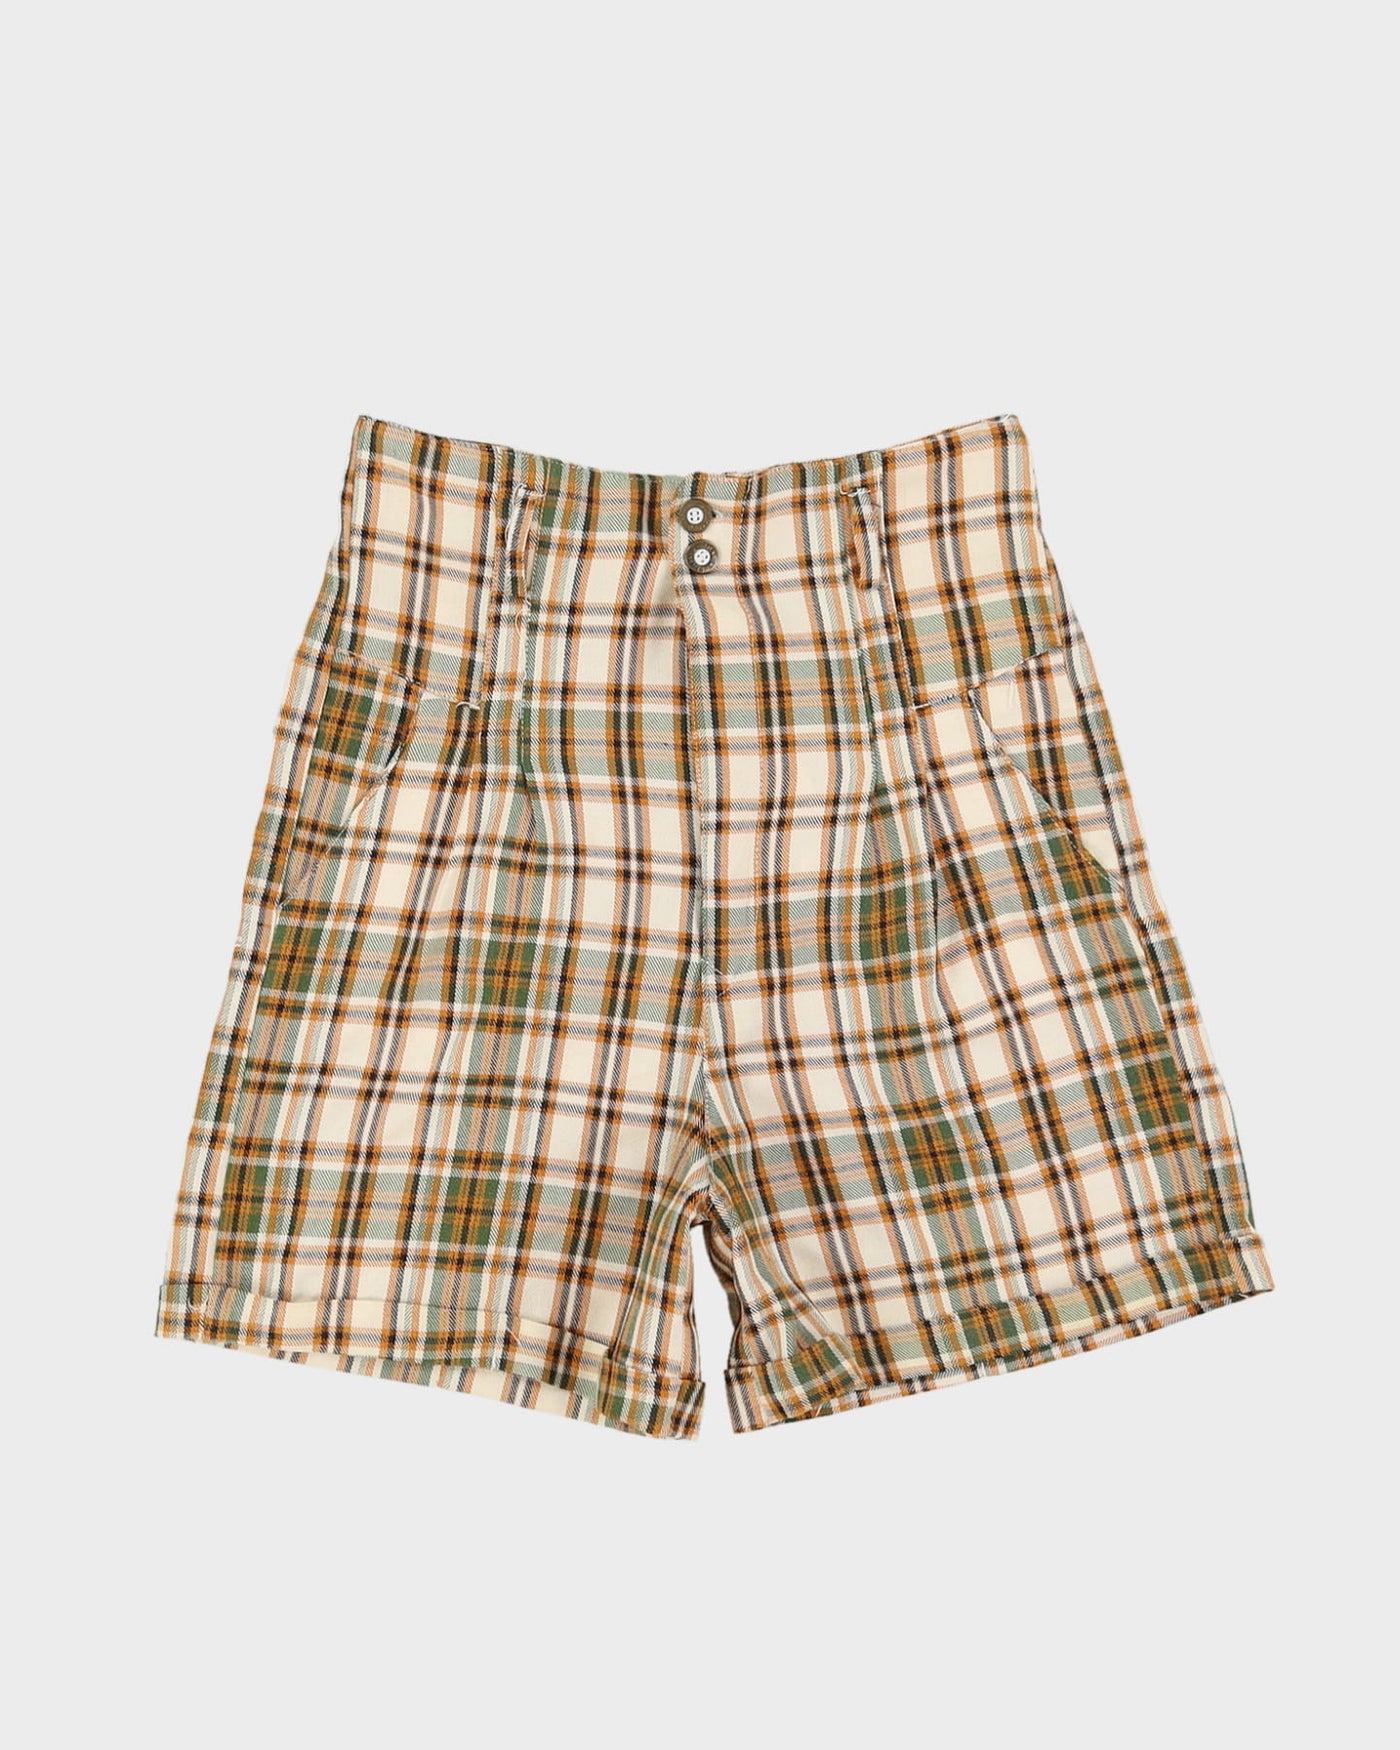 Vintage 1980s Cream Checked Shorts - S